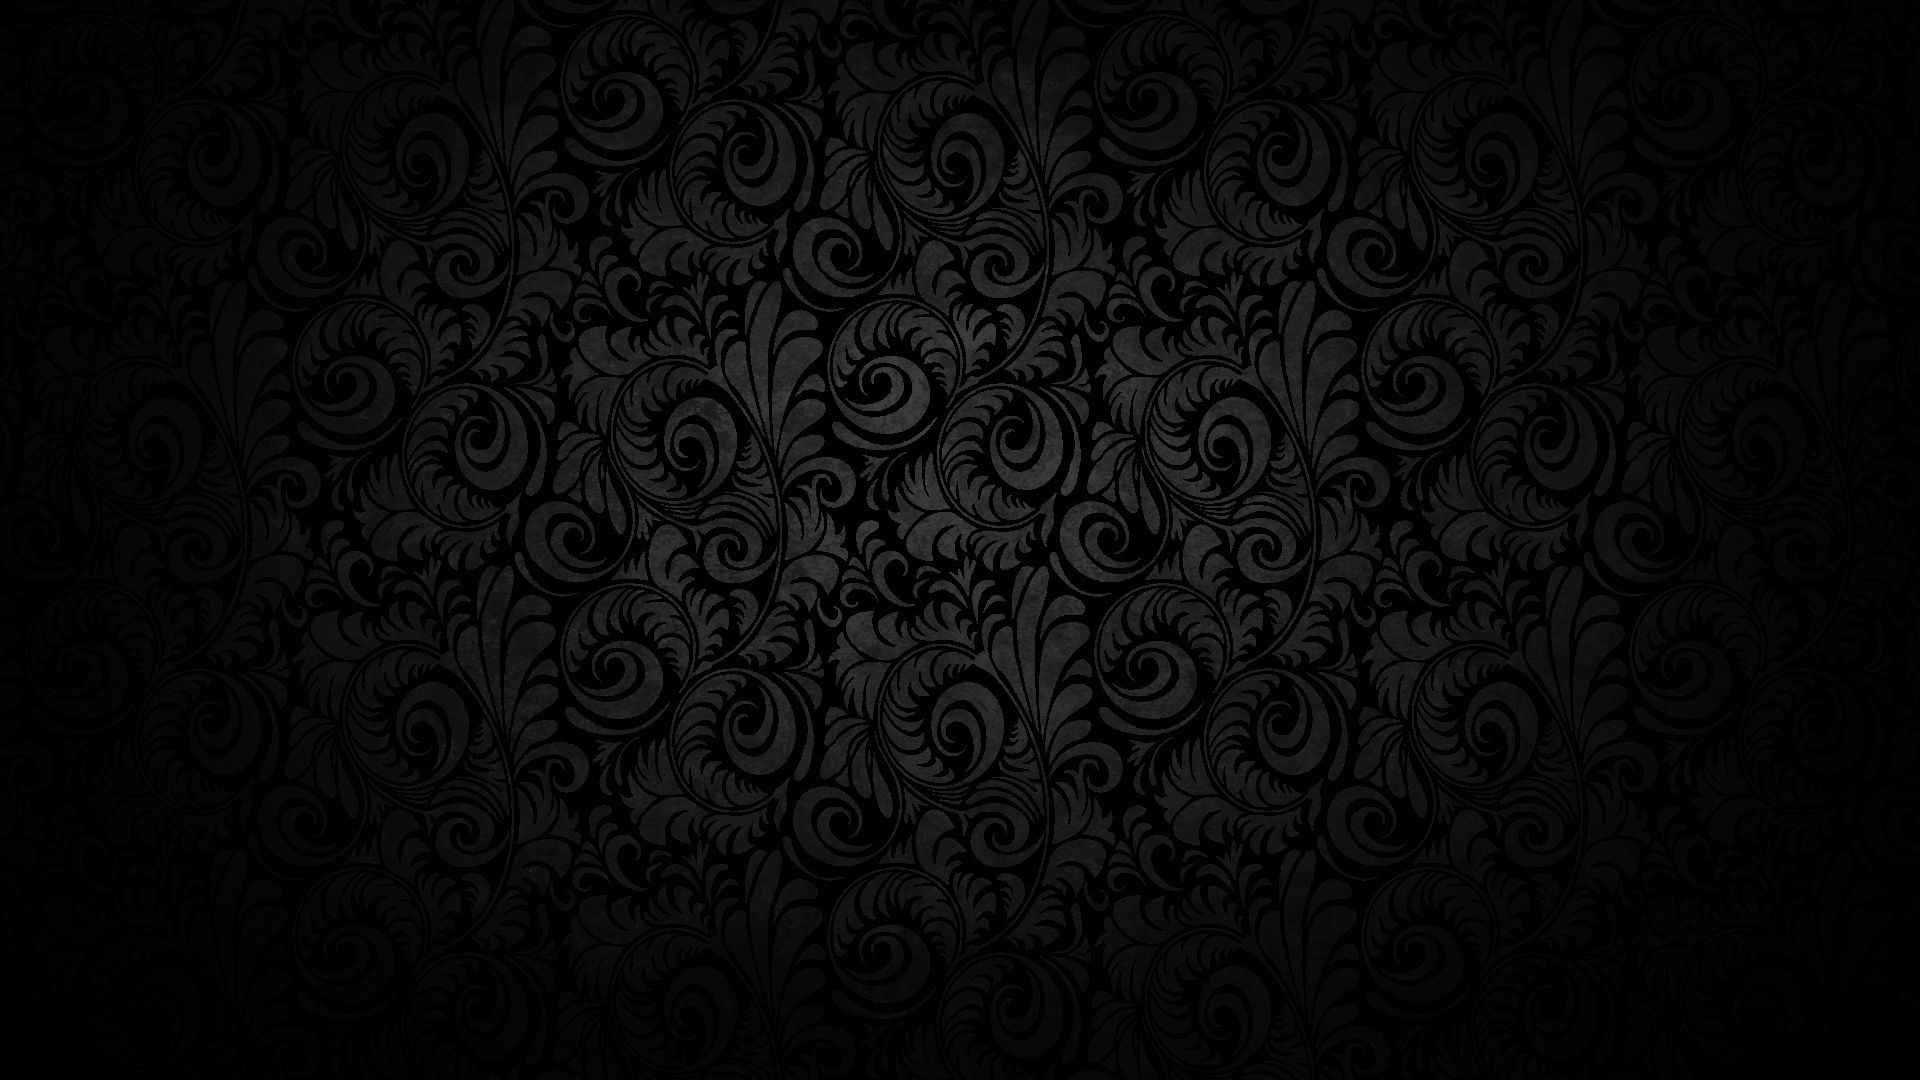 1080p-Wallpapers-of-Abstract-Black-Swirl-Wallpaper-Background -